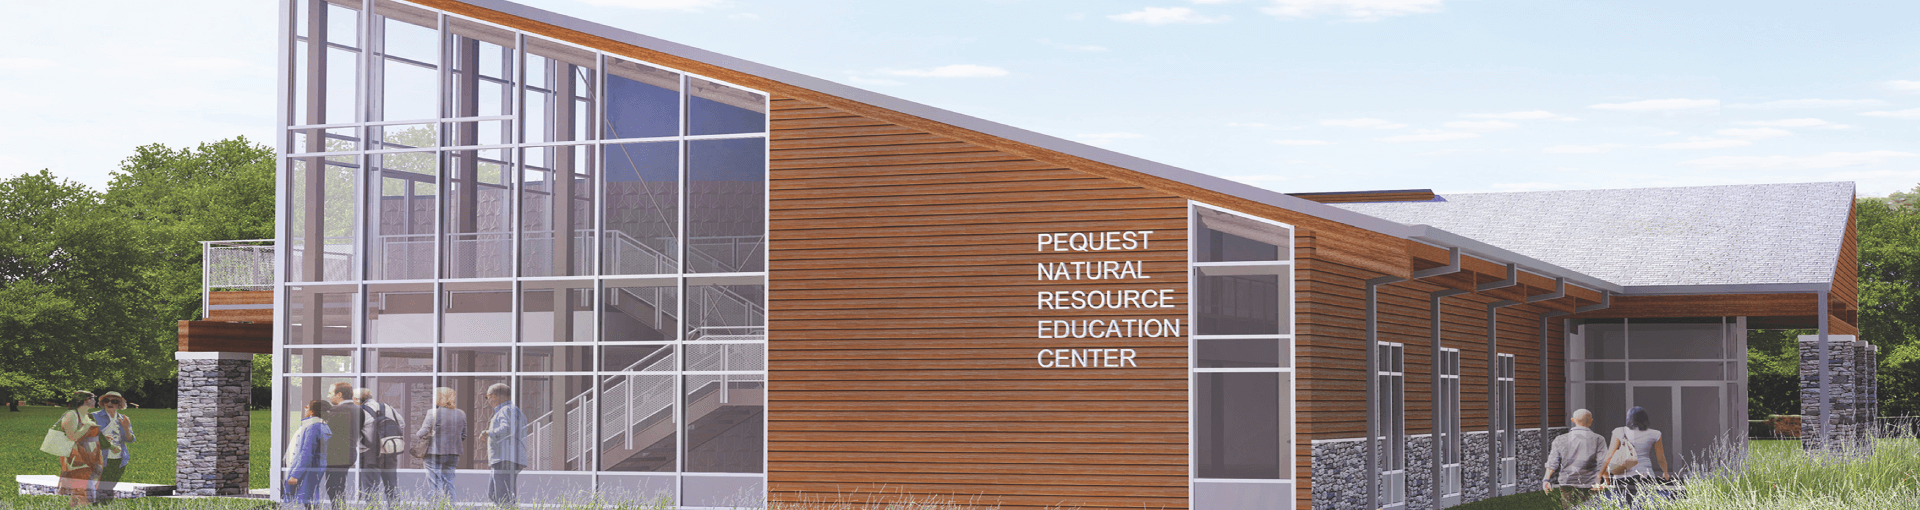 PEQUEST NATURAL RESOURCE EDUCATION CENTER